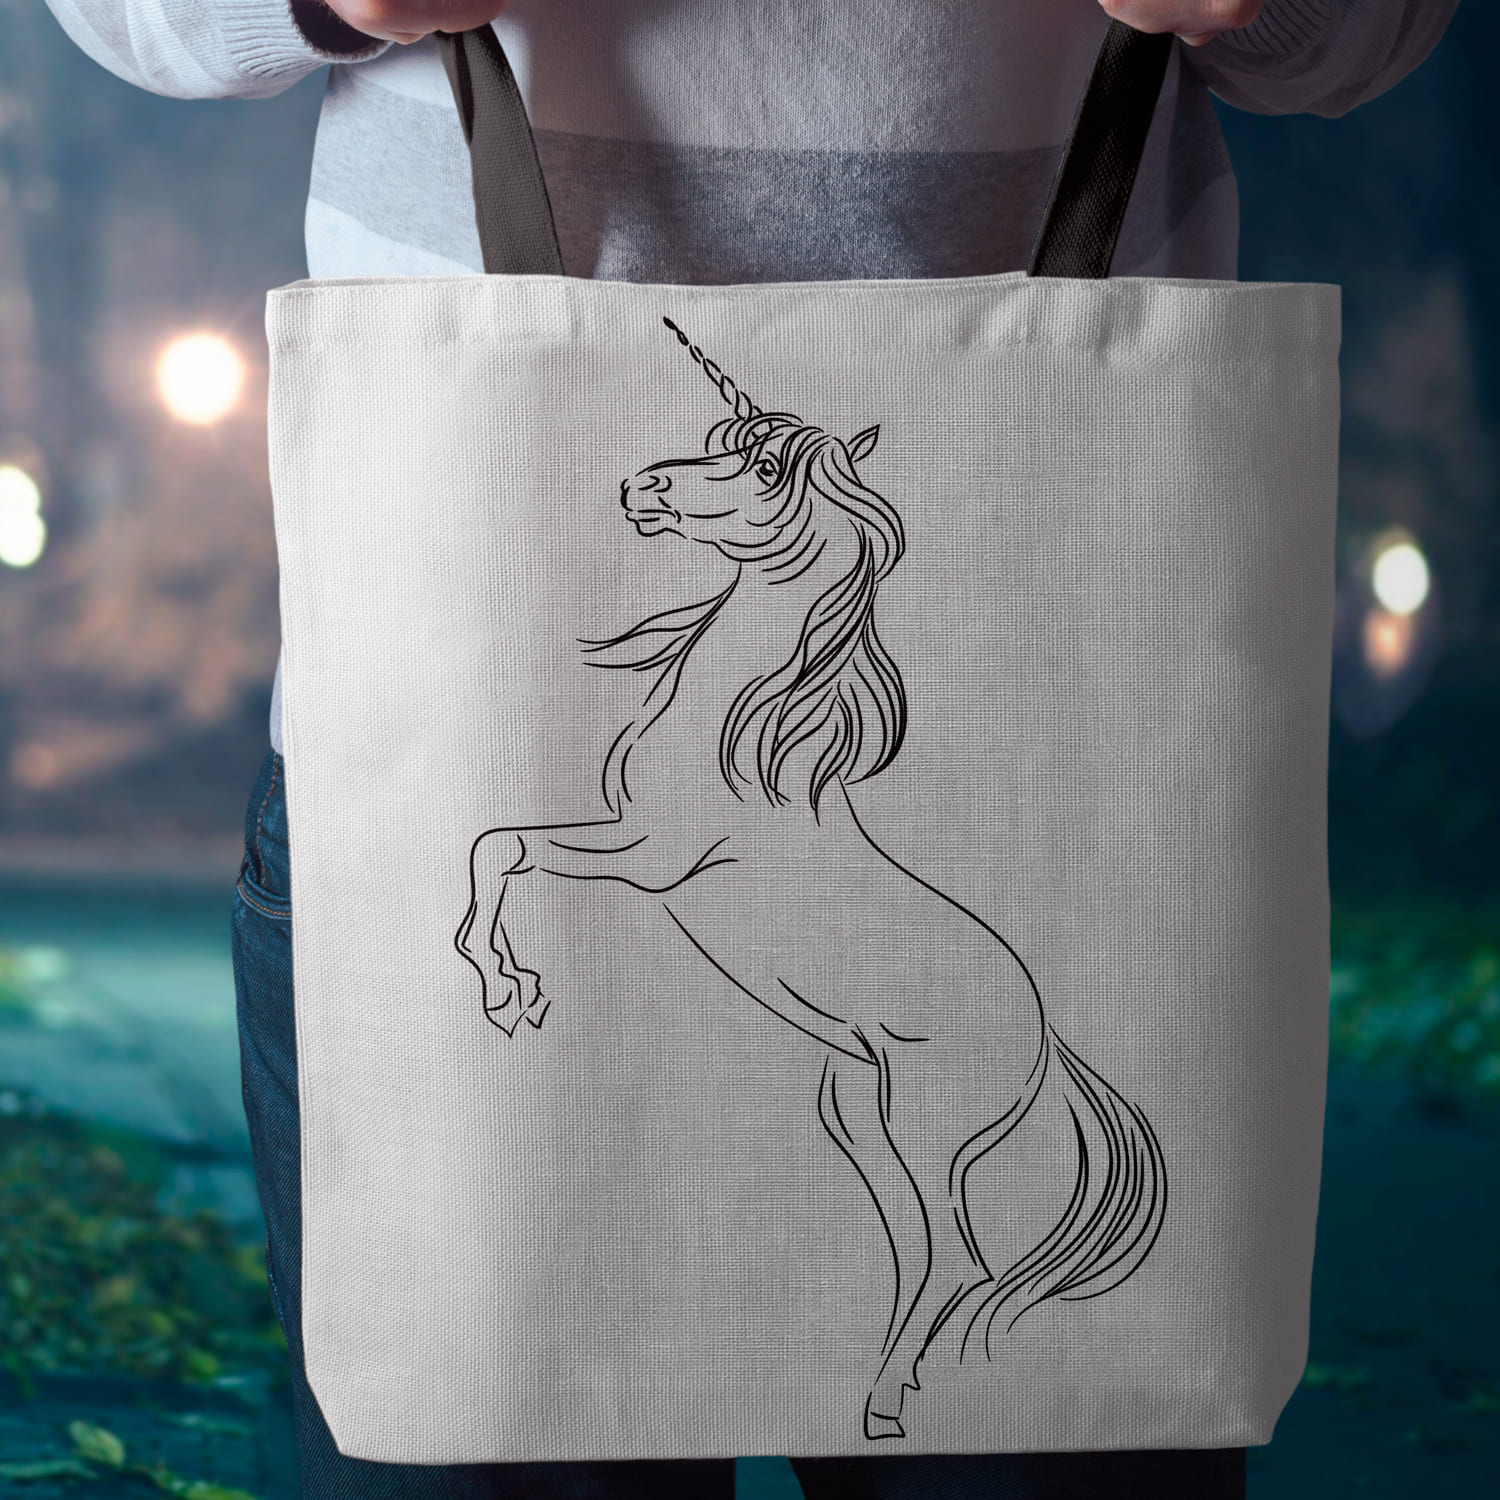 Shopping bag with printed unicorn in minimalistic style.